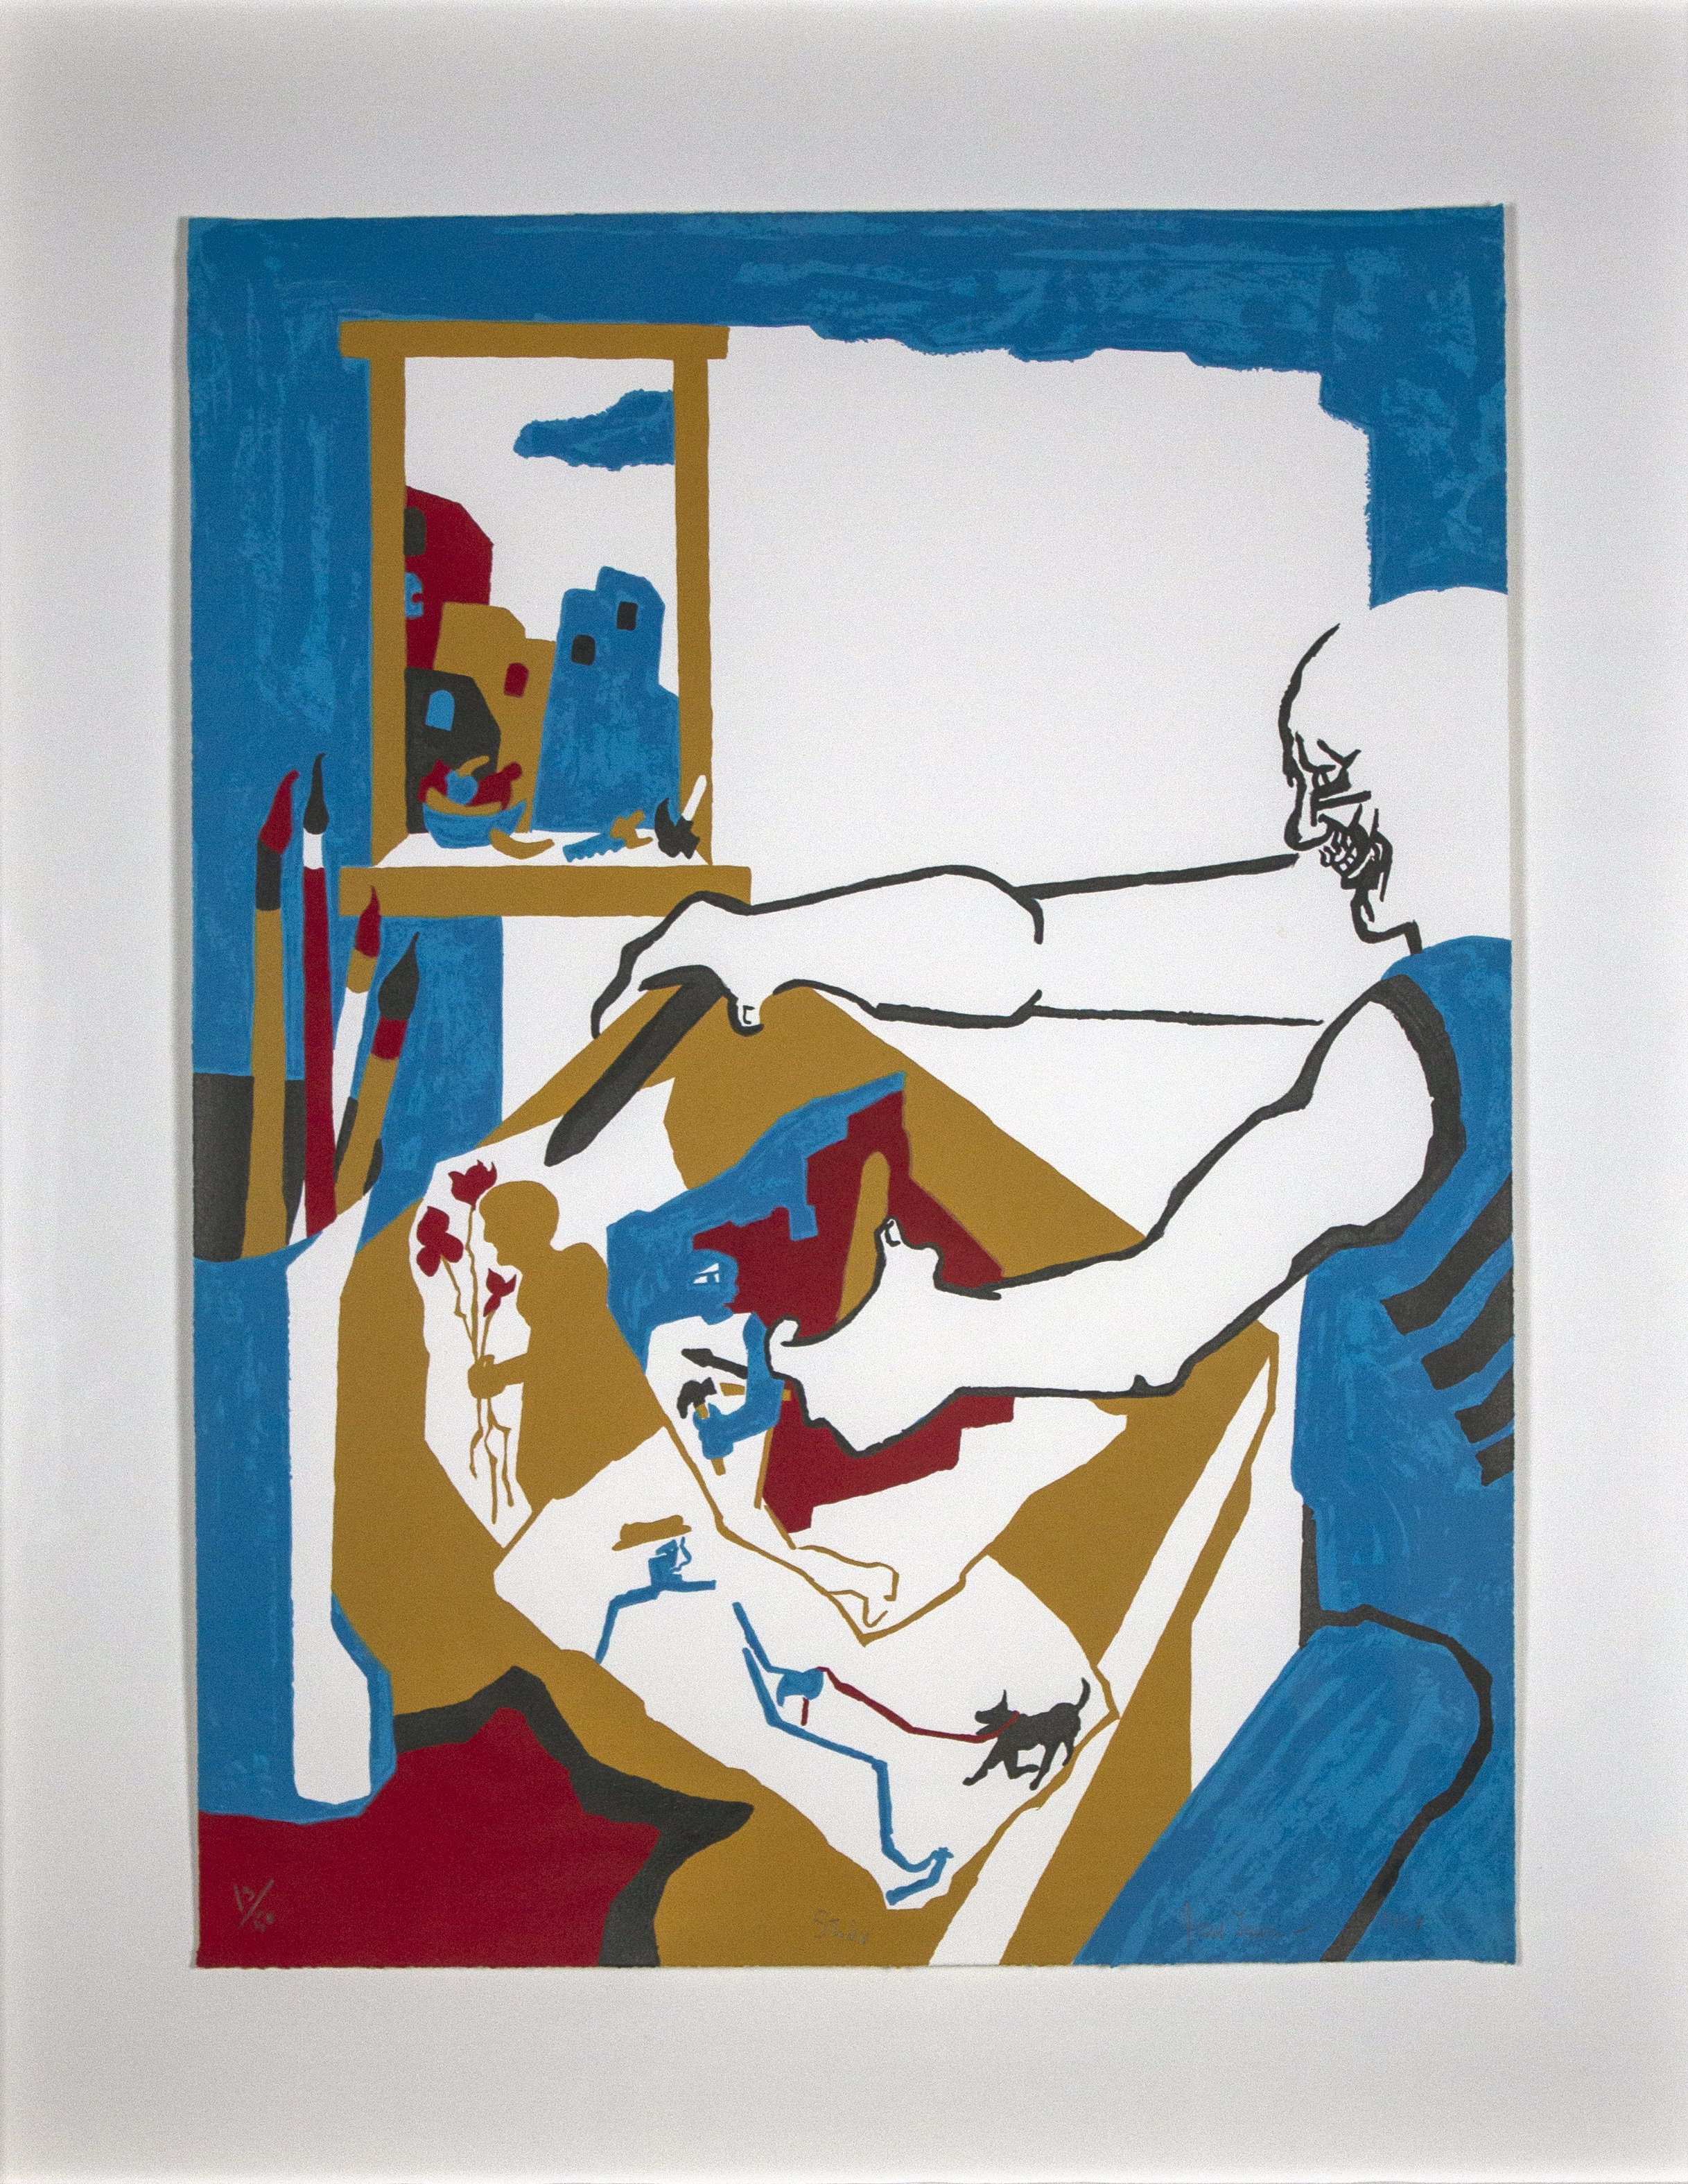  Jacob Lawrence,&nbsp; Studio , 1994, lithograph 13 of&nbsp;50, The Paul&nbsp;R. Jones Collection of American Art at the University of Alabama, © 2023 The Jacob and Gwendolyn Knight Lawrence Foundation,&nbsp;Seattle / Artists Rights Society (ARS), Ne